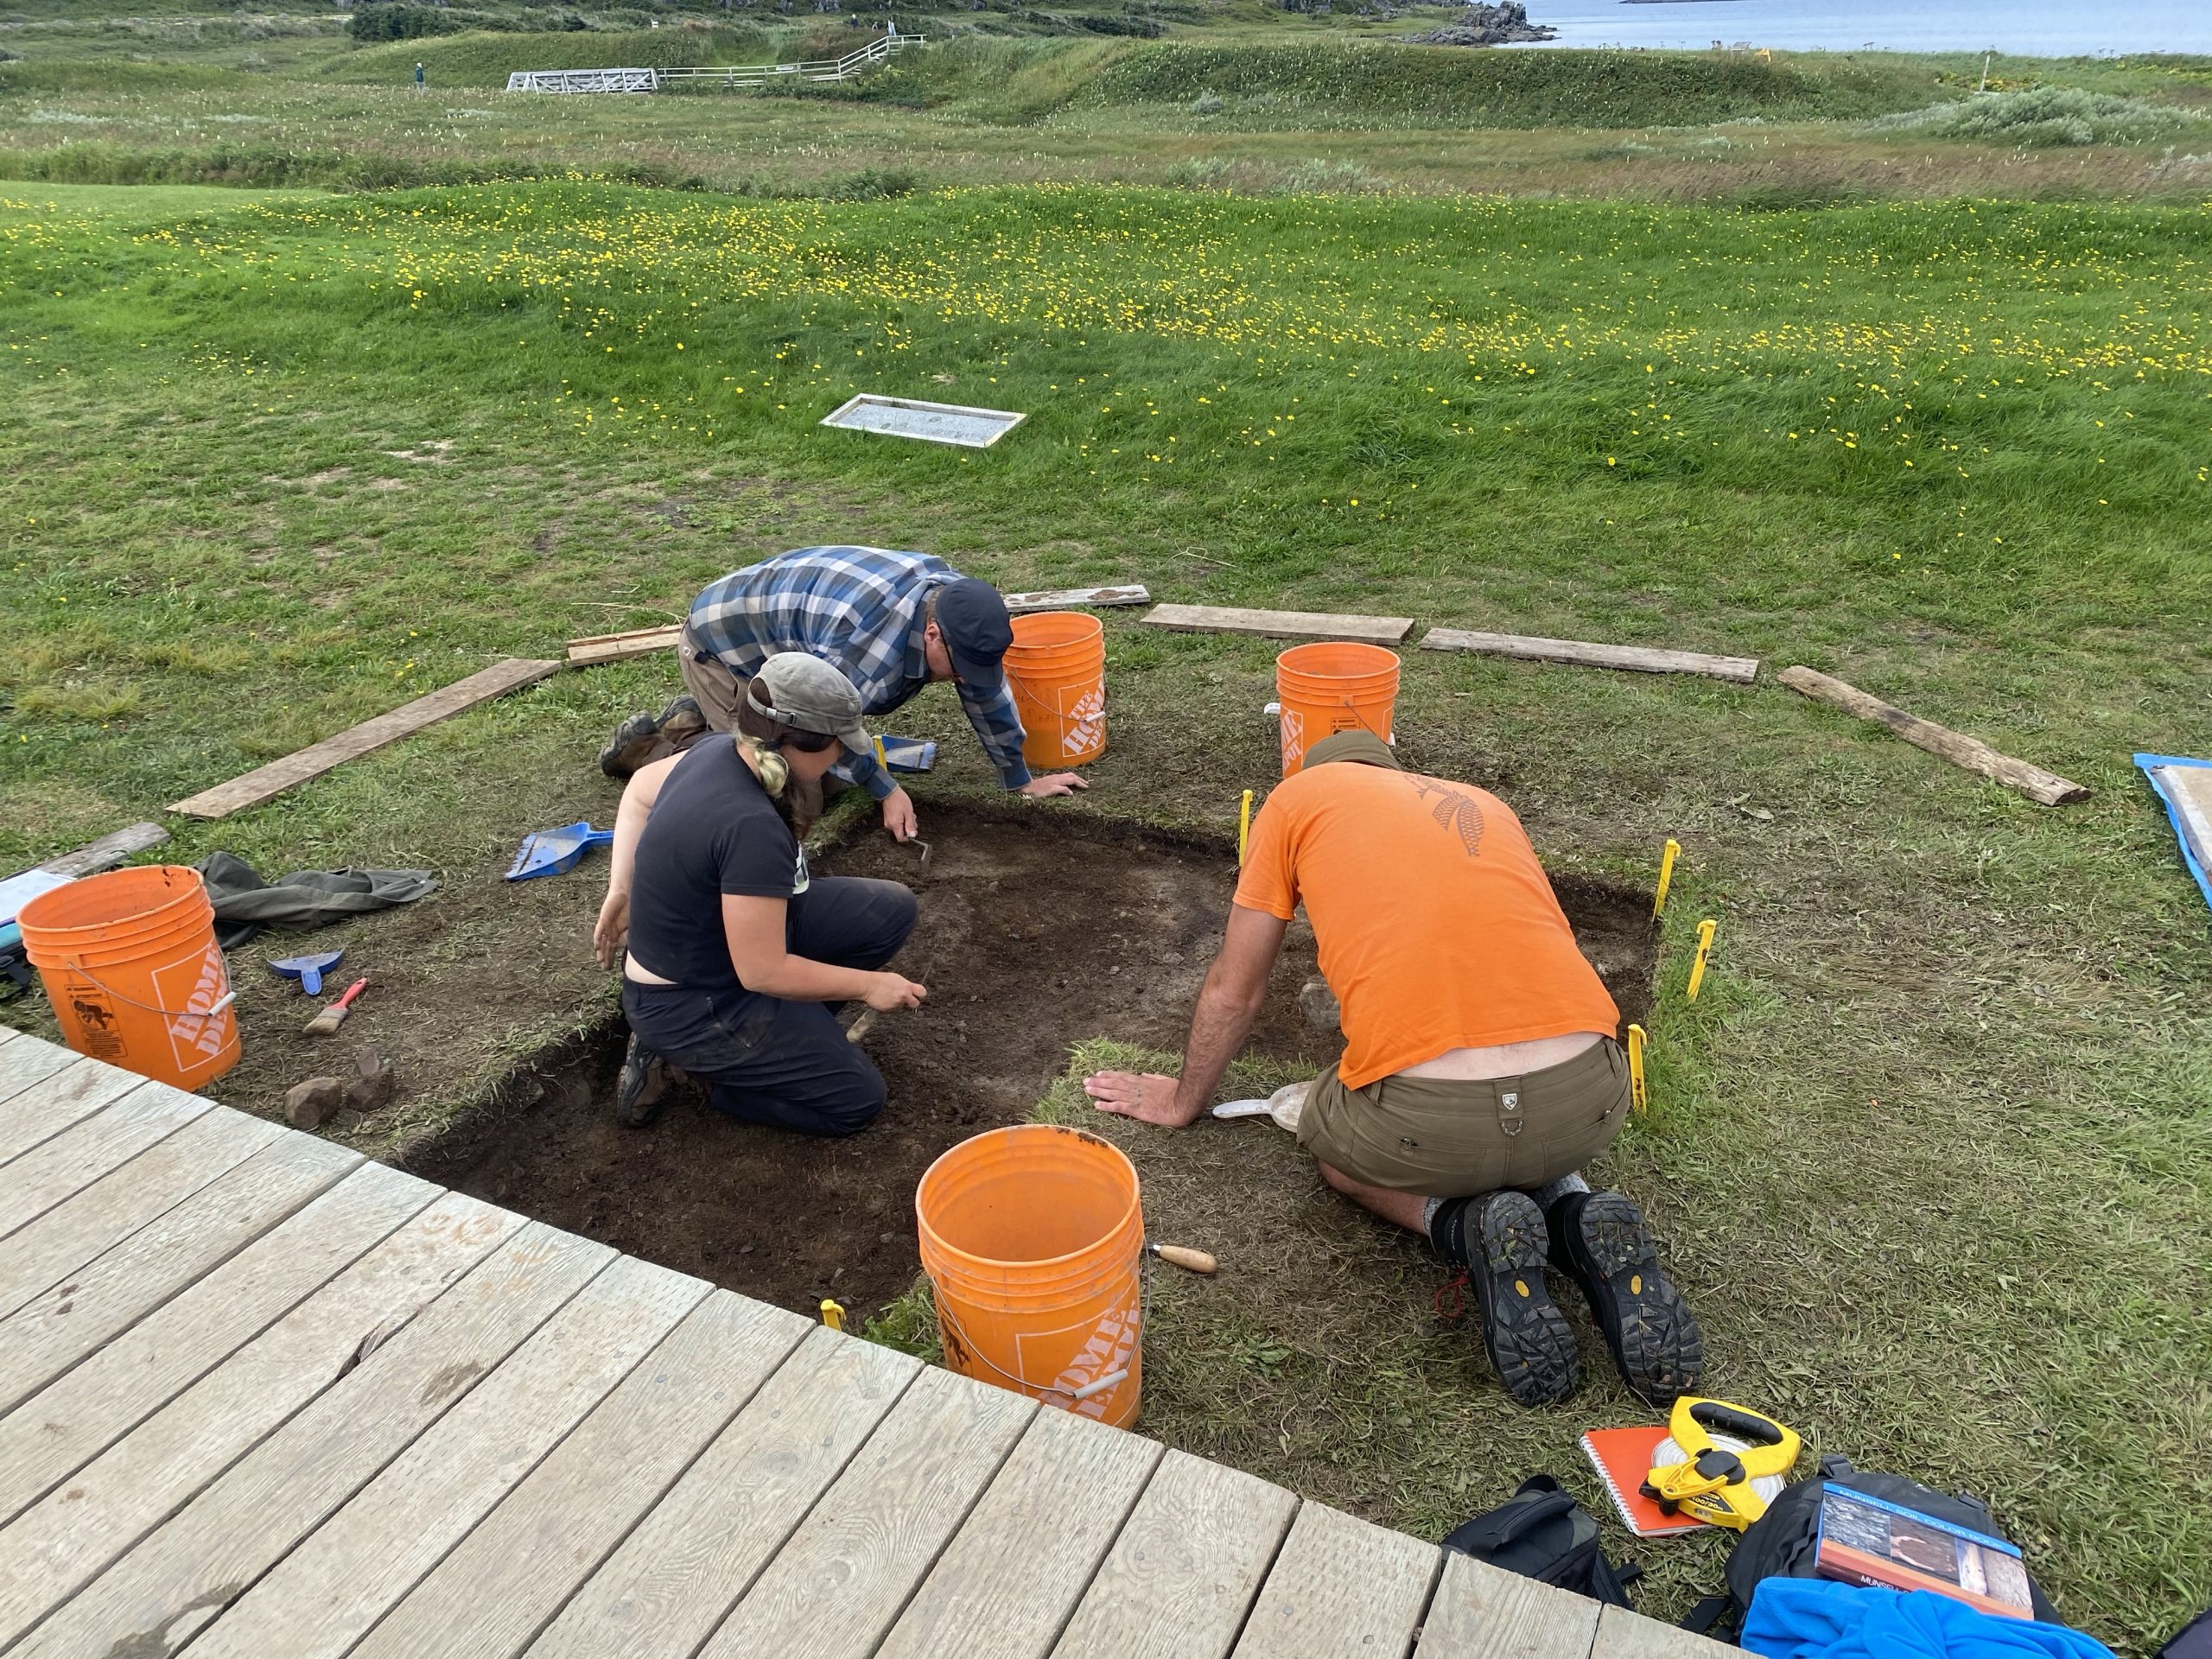 A UNESCO archeological team doing an active dig adjacent to one of the sod house remnants.